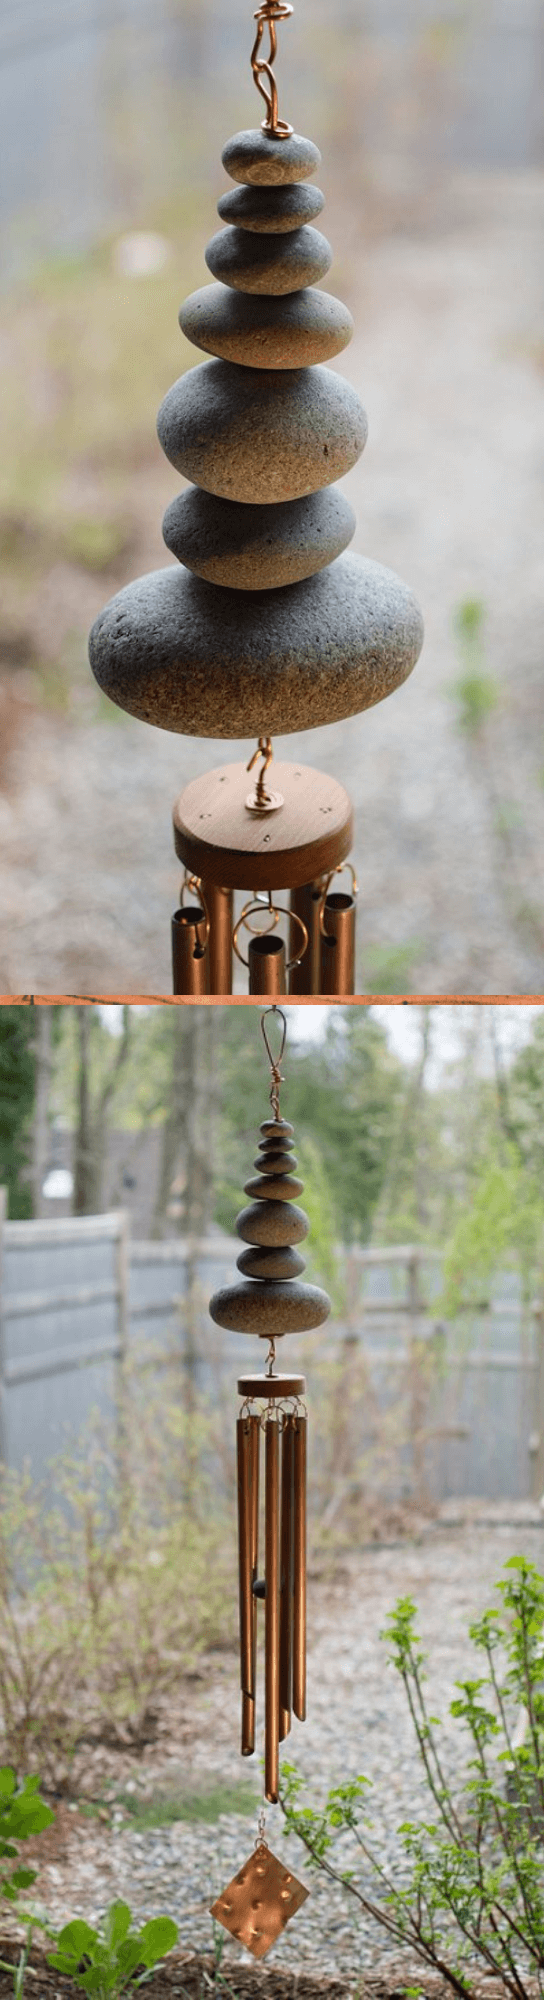 Wind Chime Outdoor Large Copper Beach Stones Handcrafted